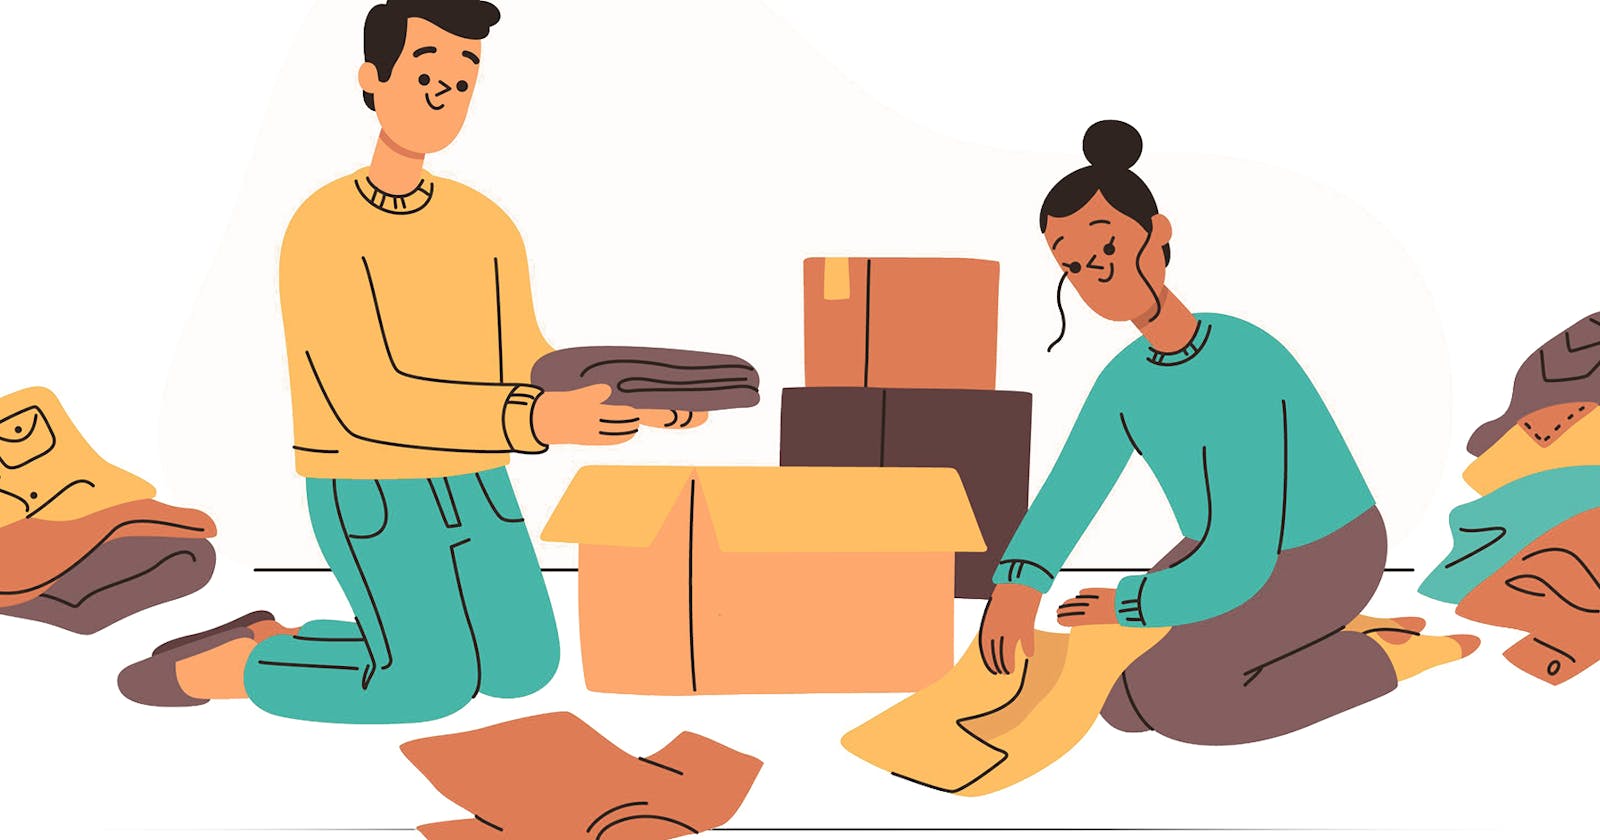 How to Package Products for Delivery